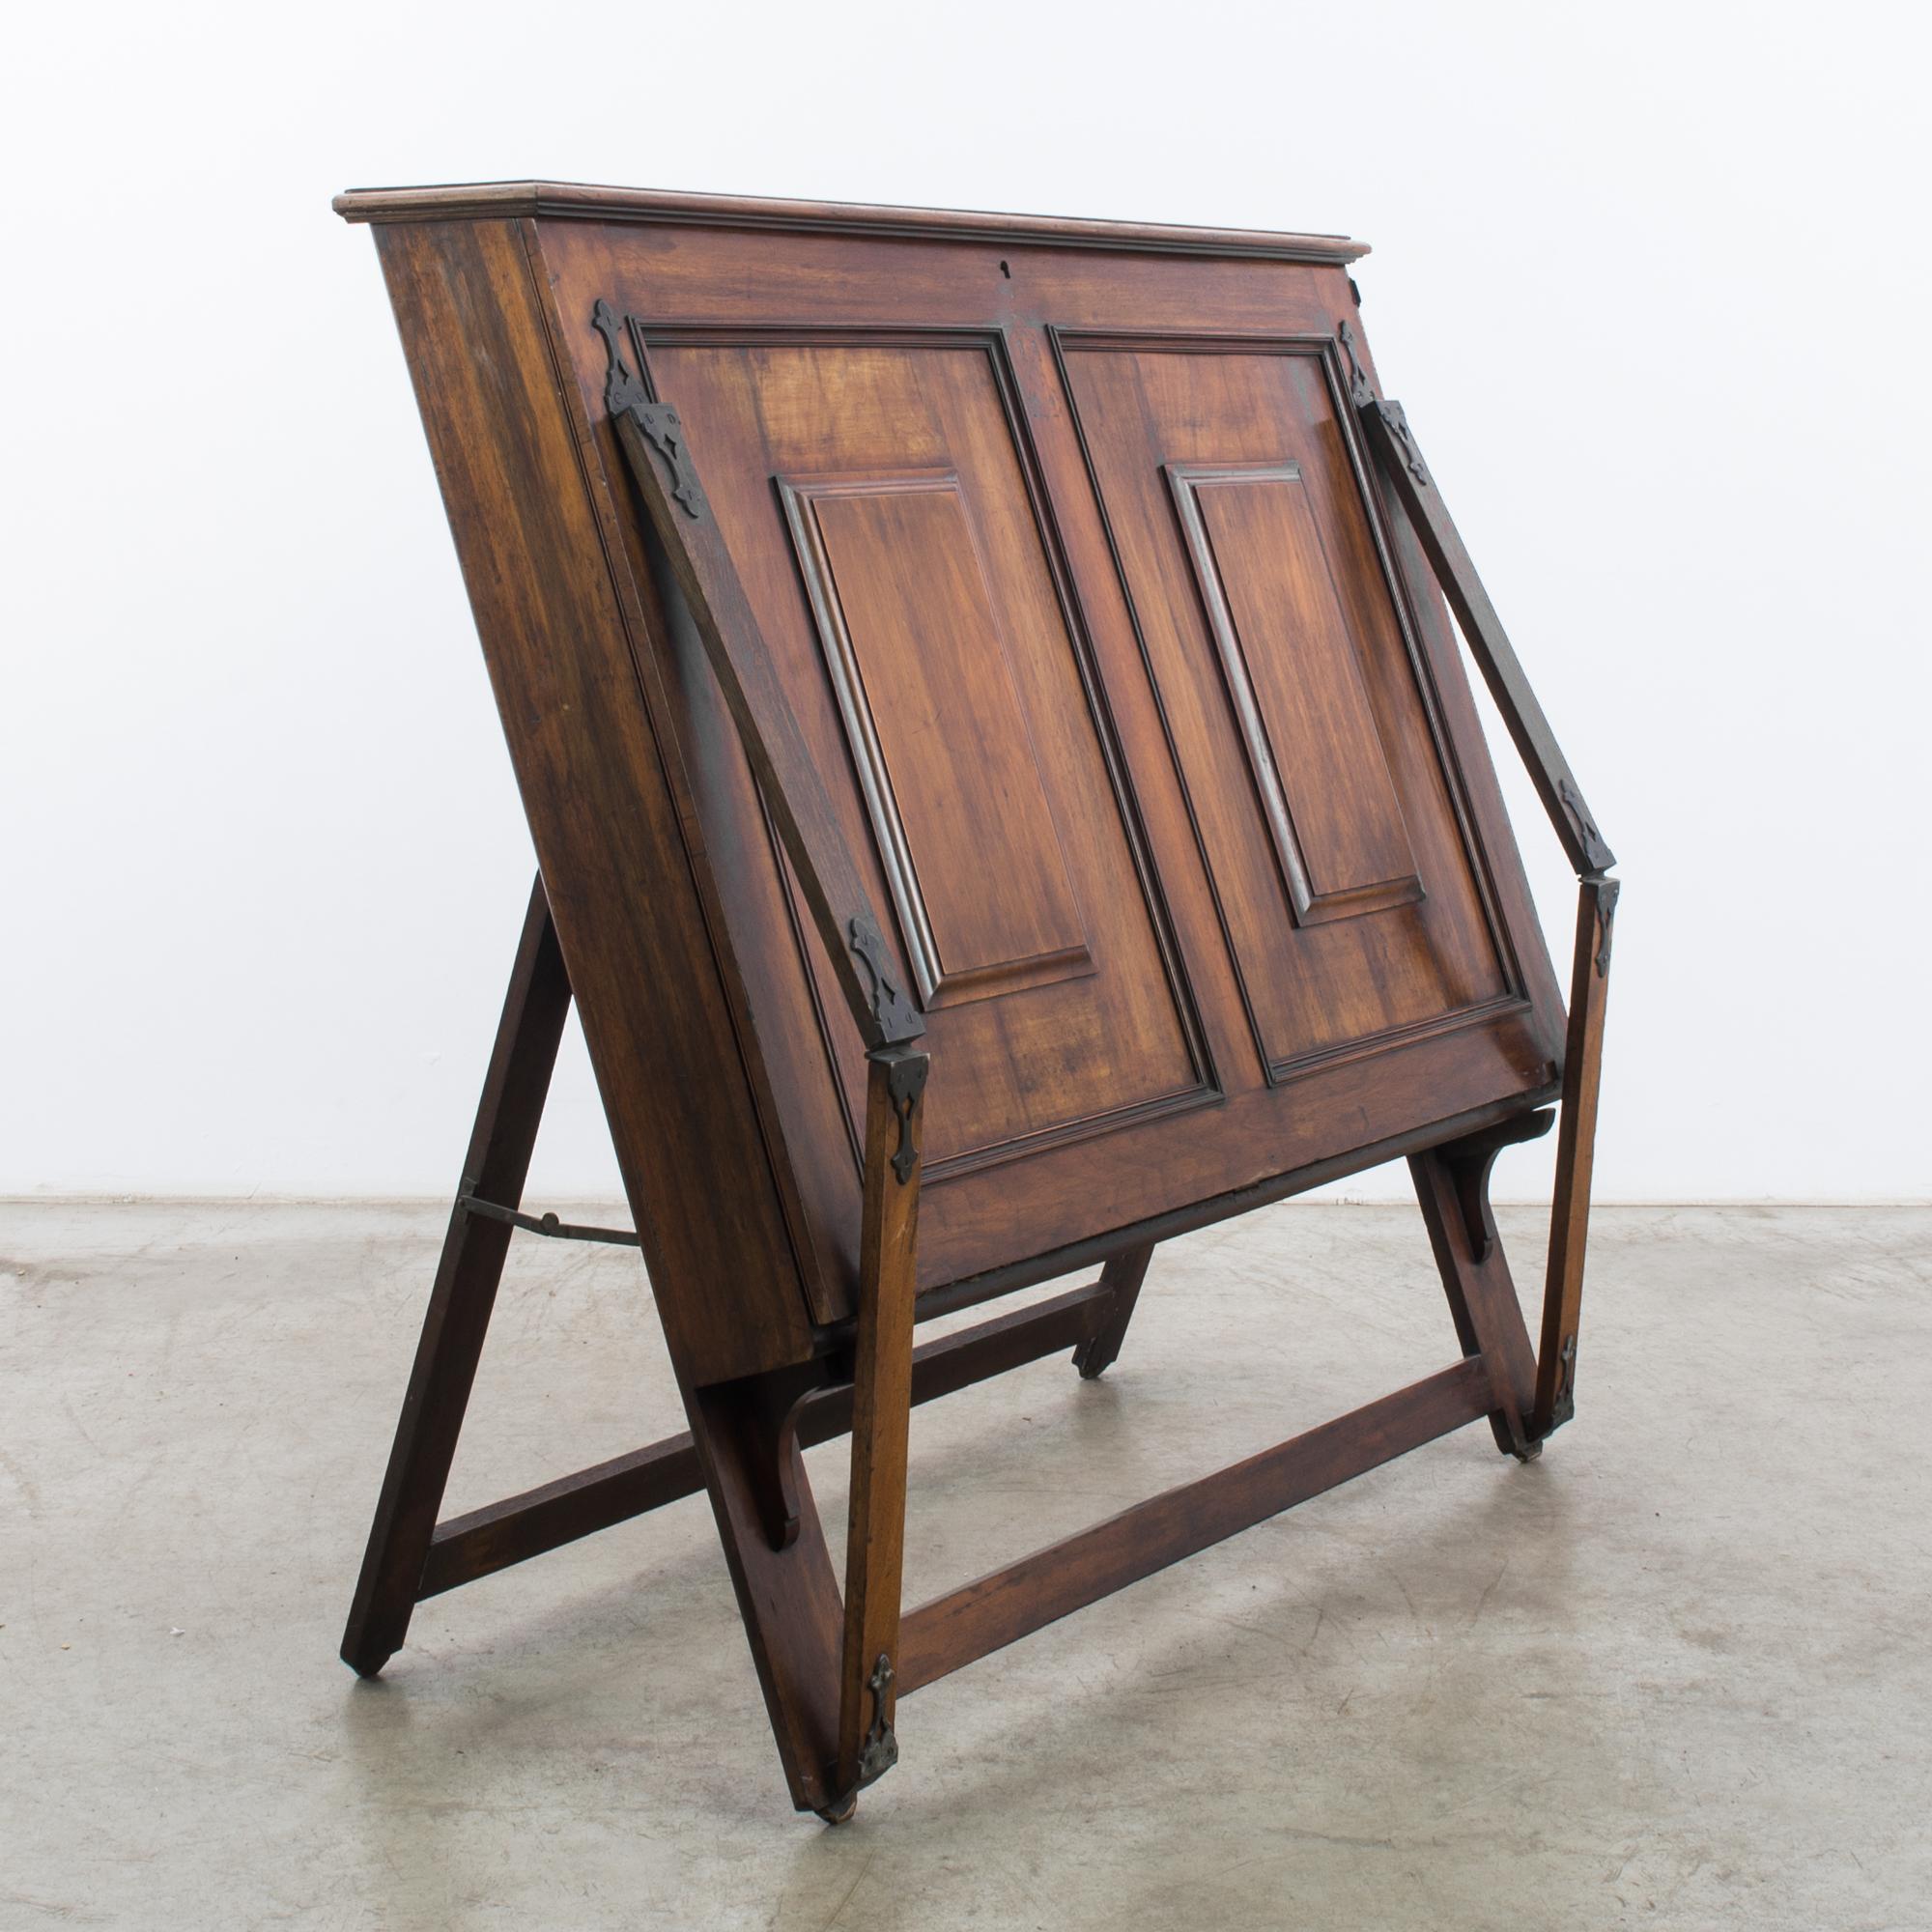 An antique architect’s cabinet from the UK, circa 1880, originally used to store and display large scale drawings and plans. The wood is a dark sienna, with a deep, rich polish. The handsome paneled casing opens out on hinged legs into a low display